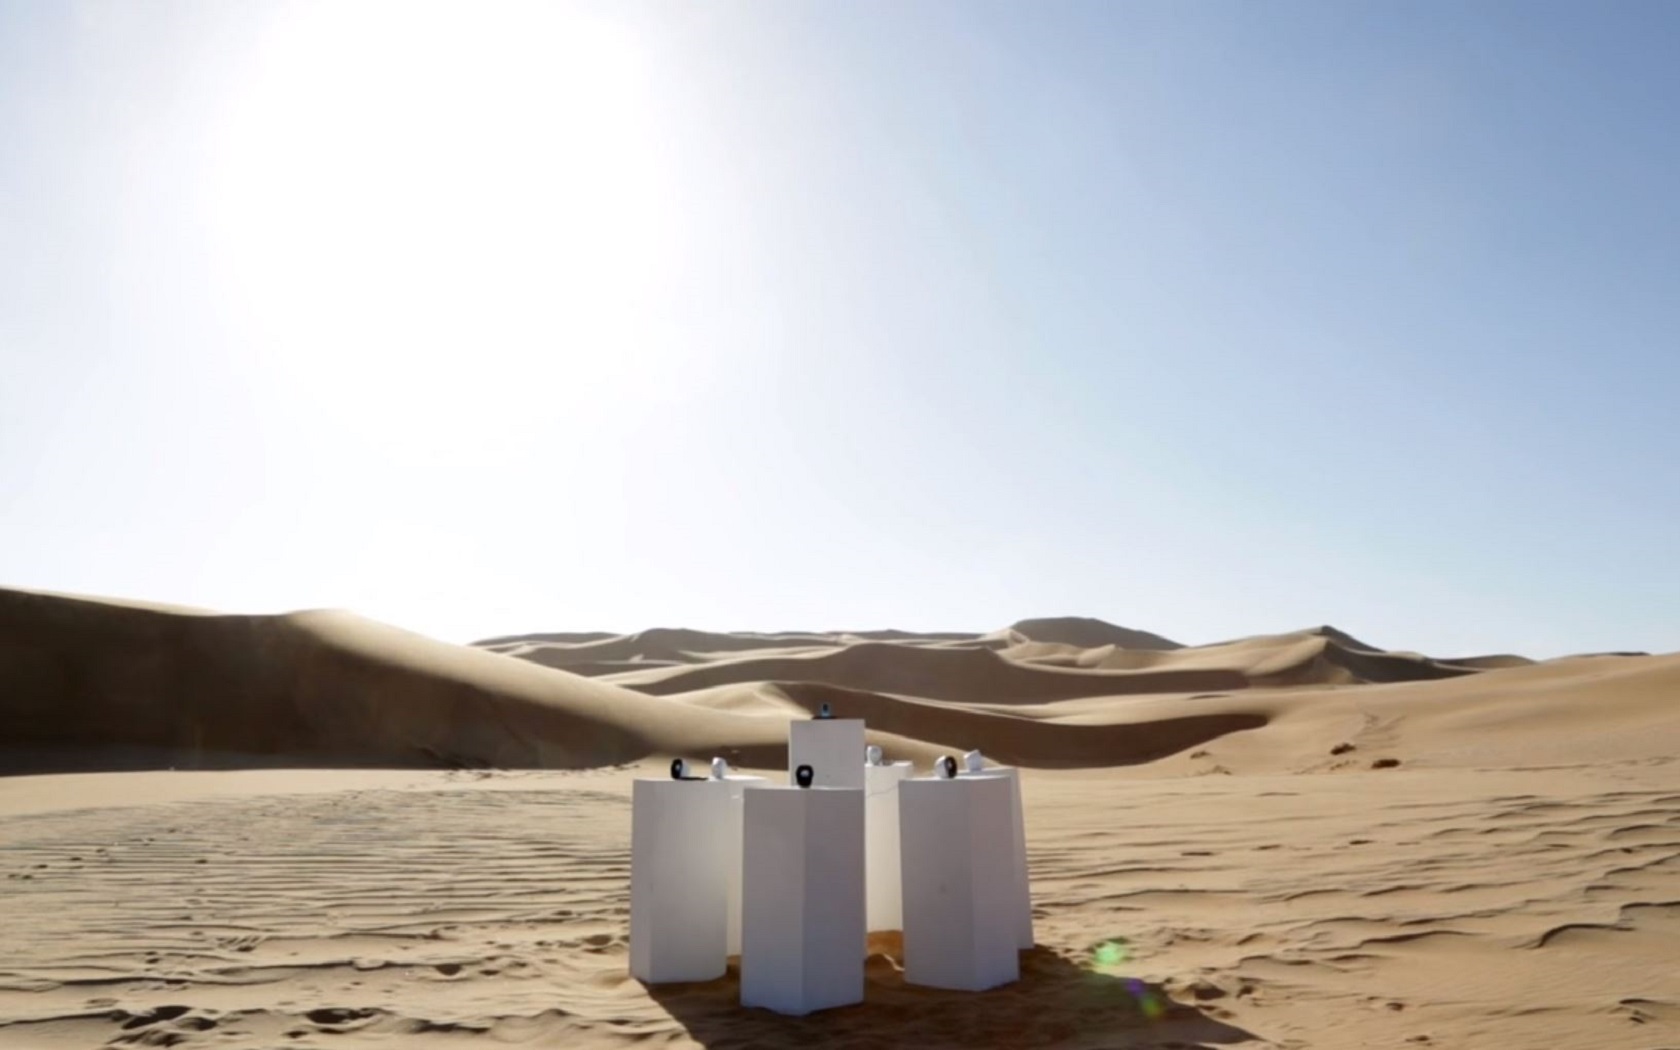 'Africa' will now play forever in the middle of a desert, because of course it will